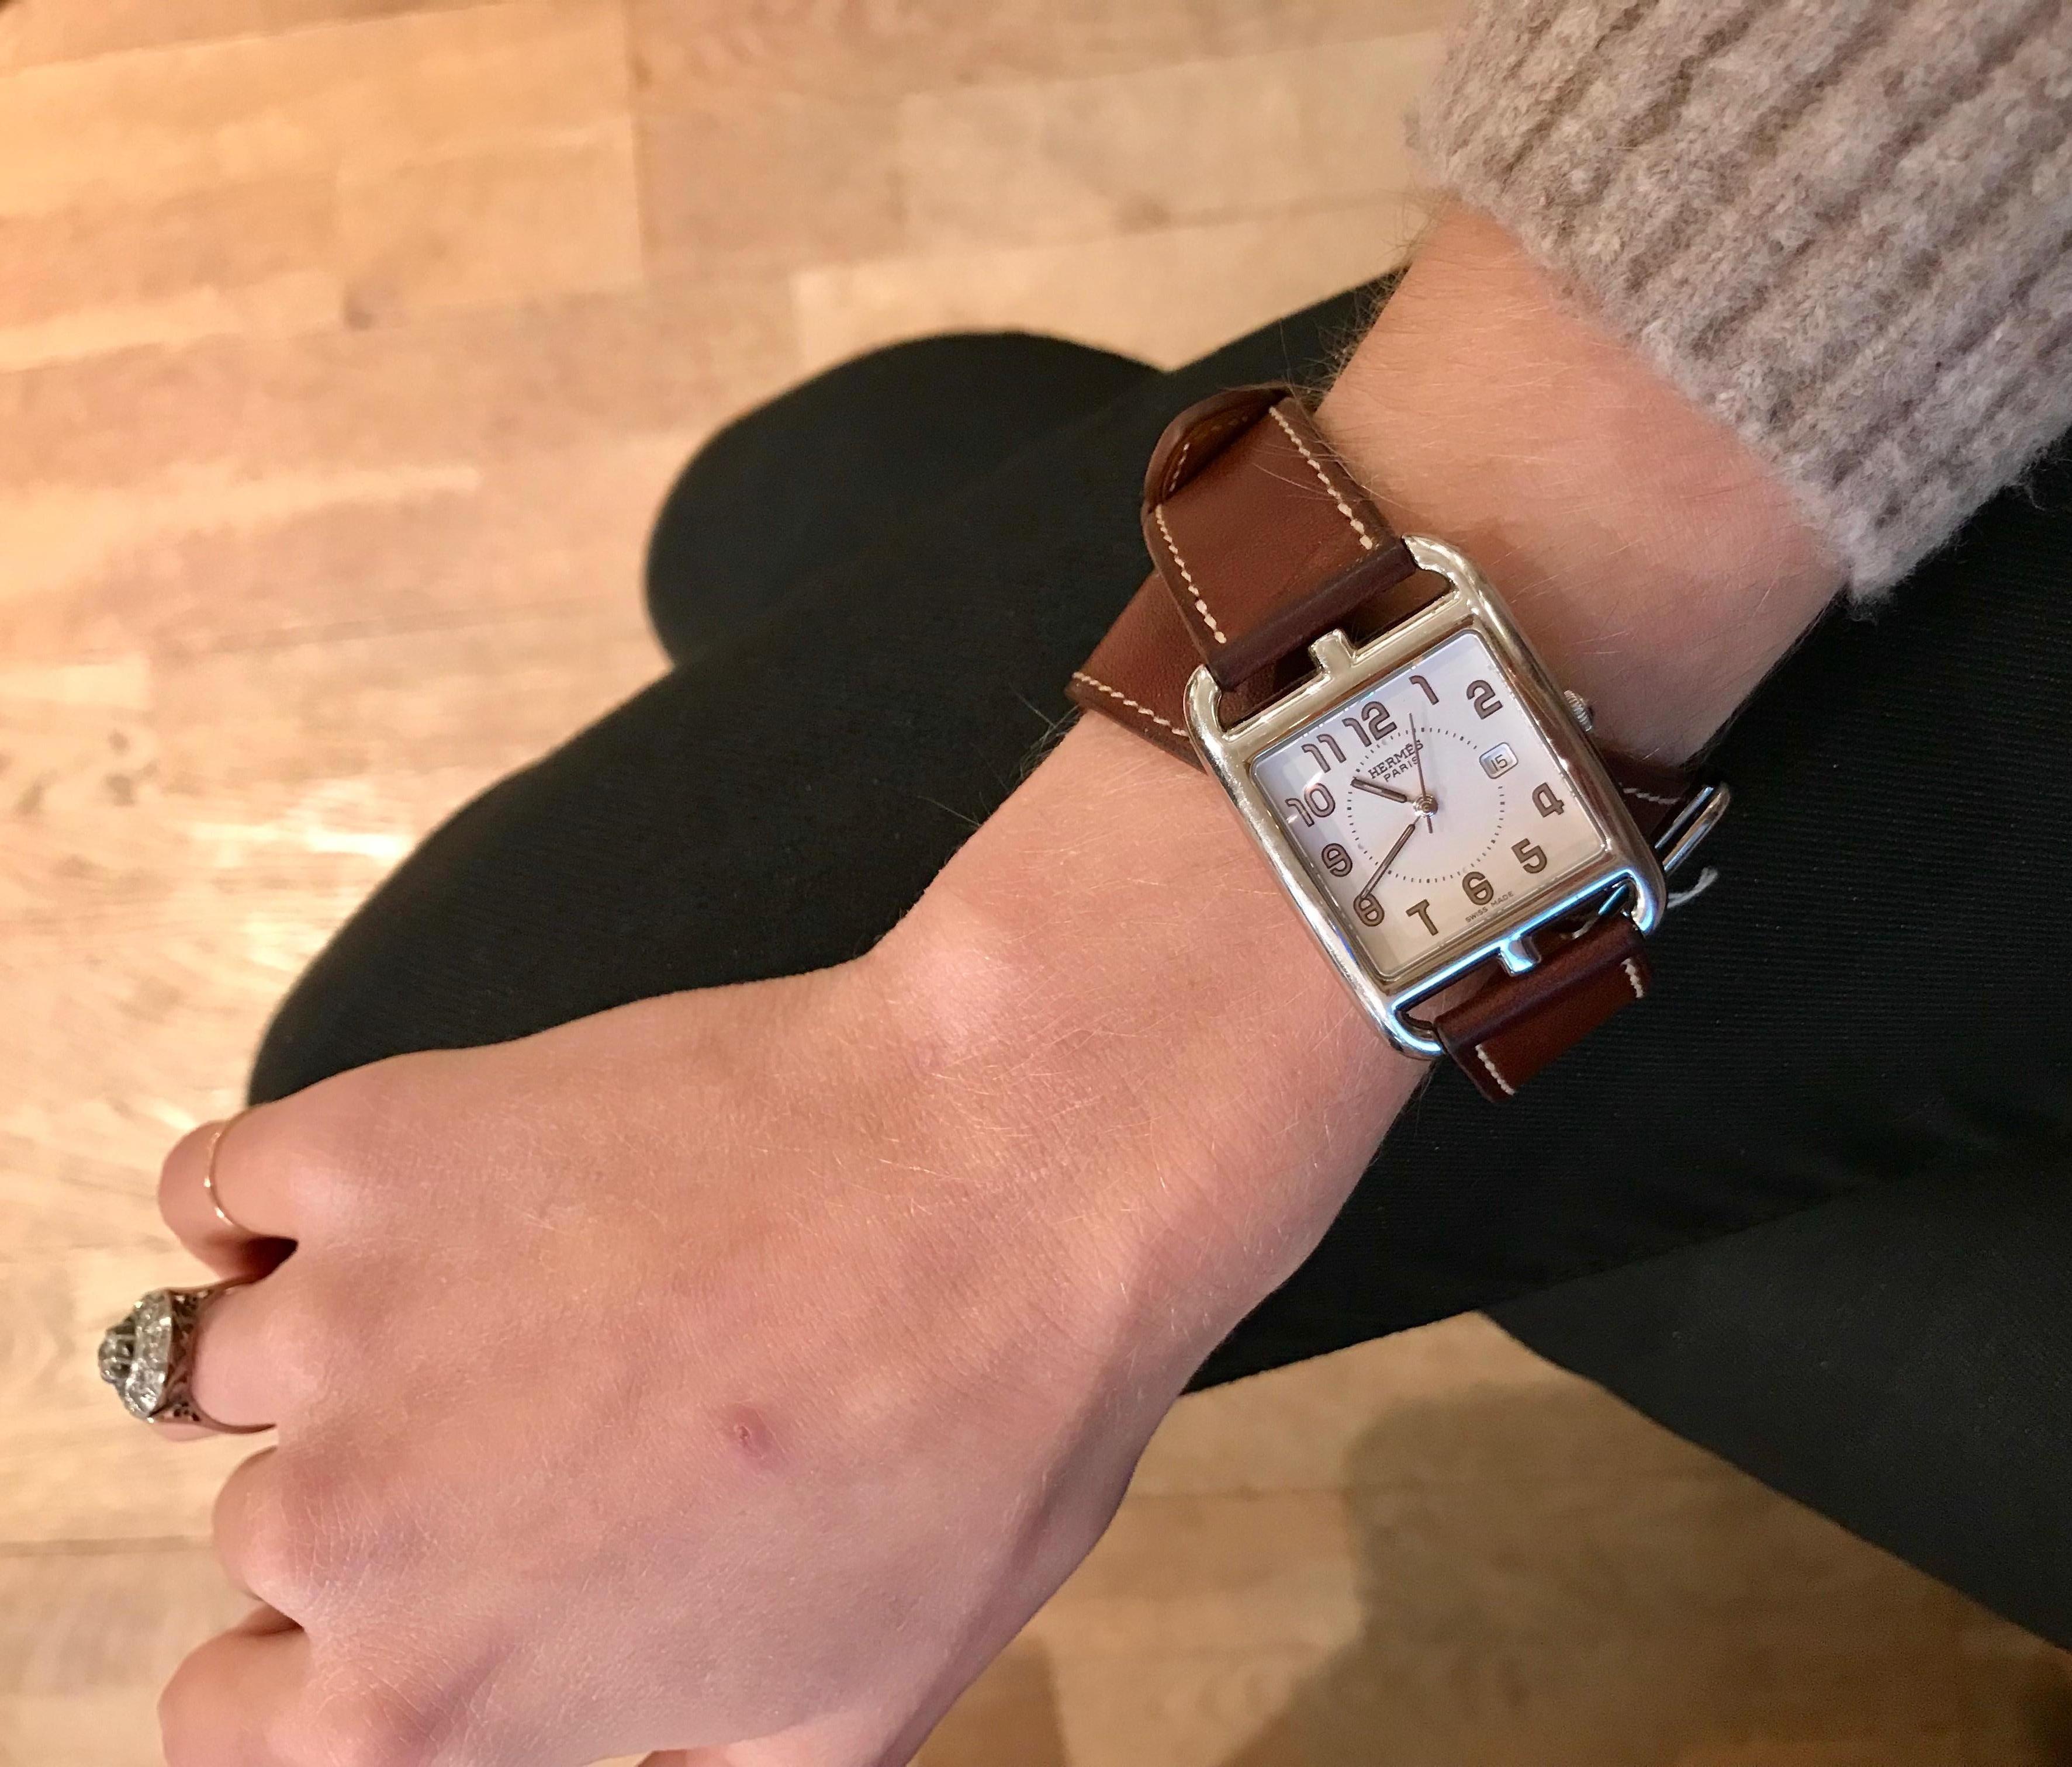 Hermès “Cape Cod” watch in stainless steel.

White dial, Arabic numerals, date at three o’clock, Luminescent hands and hour-markers.

Dial's Dimensions: 29 X 29 mm

Quartz movement.

Double turn bracelet in barenia leather with white